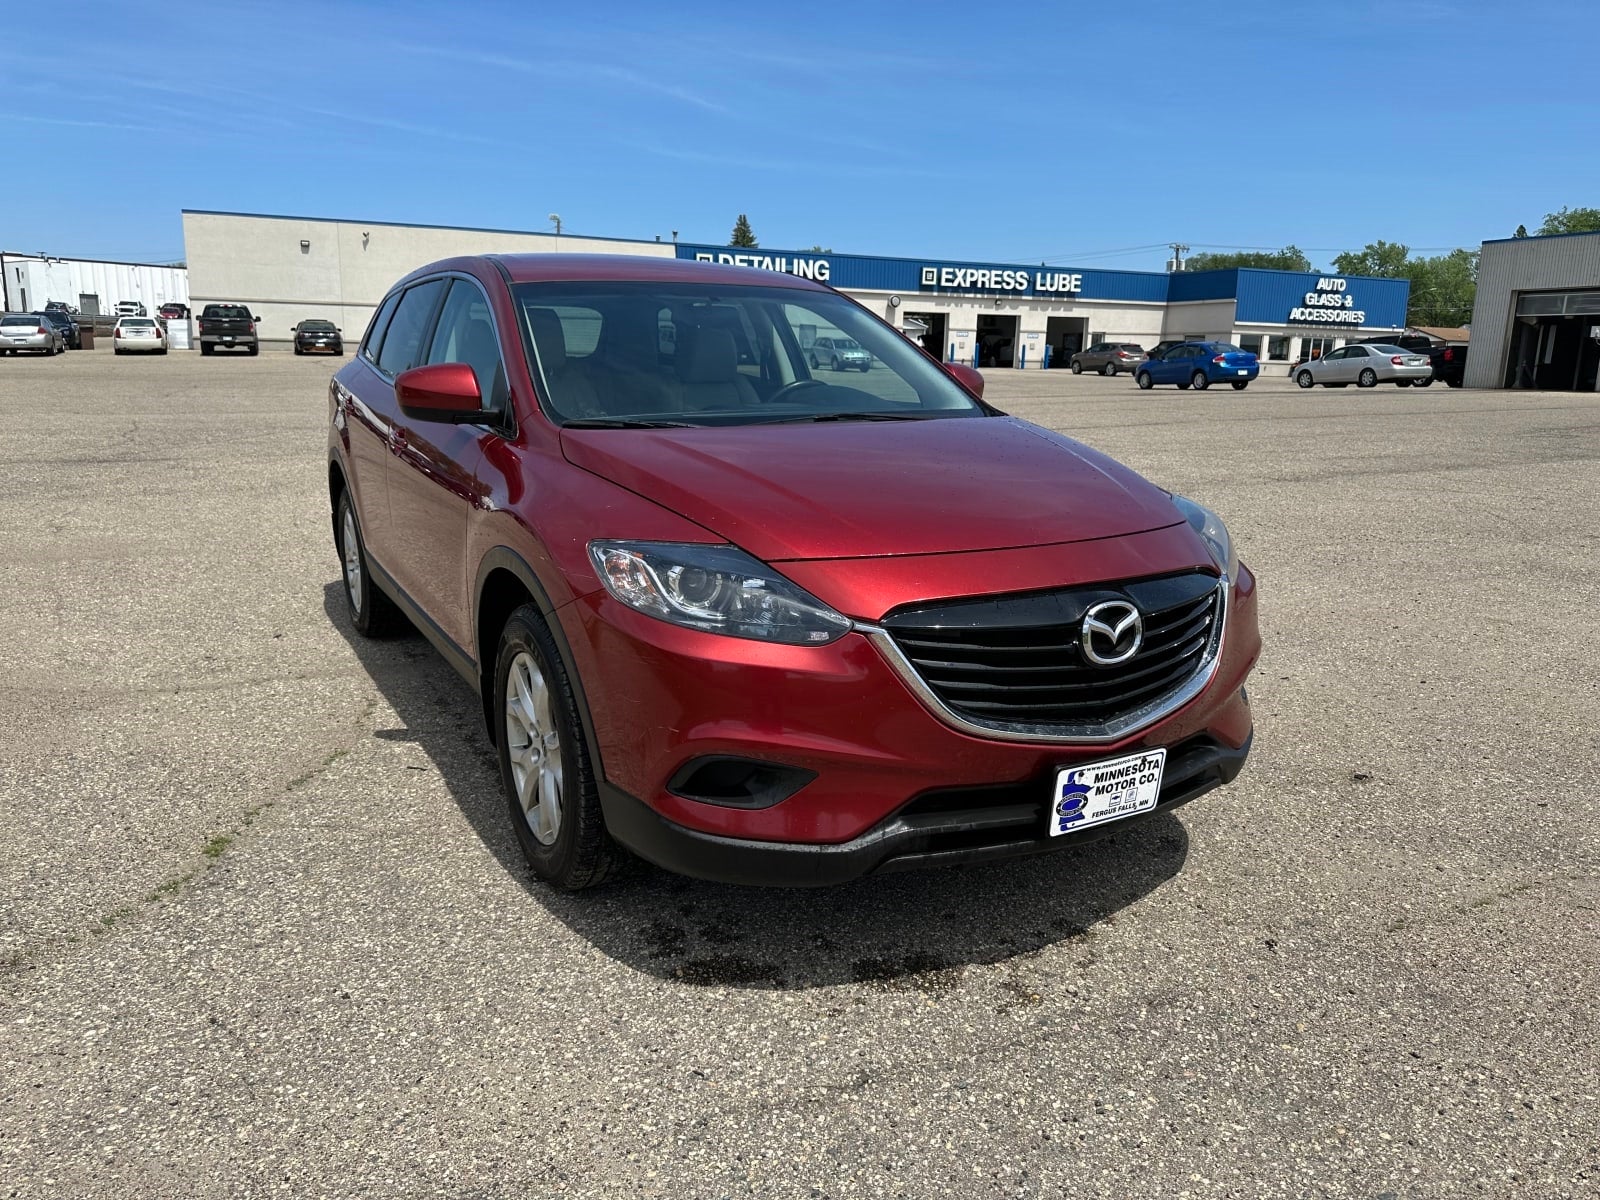 Used 2013 Mazda CX-9 Touring with VIN JM3TB3CA2D0425150 for sale in Fergus Falls, Minnesota